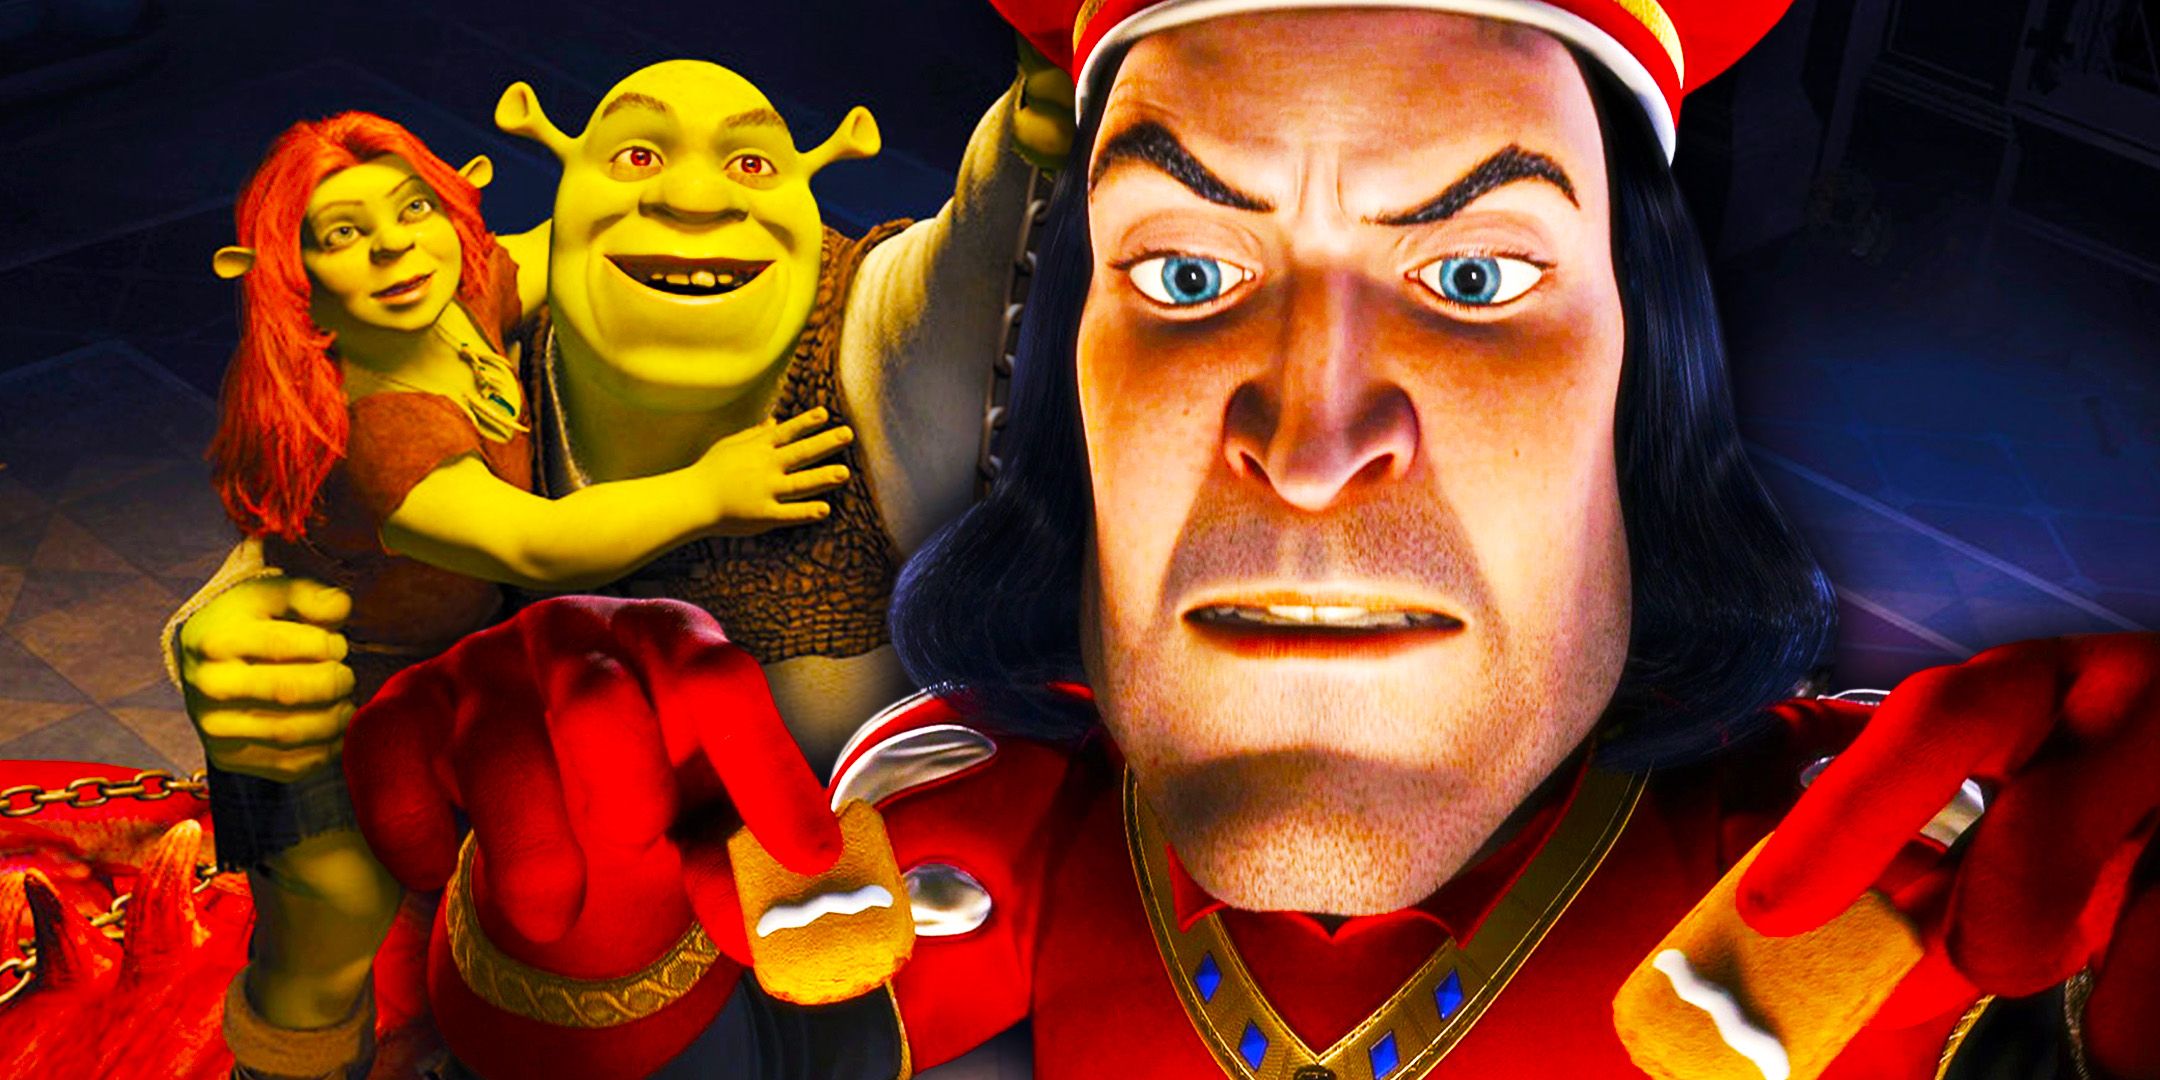 Shrek Forever After Fiona and Shrek next to Lord Farquaad holding Gingy's legs